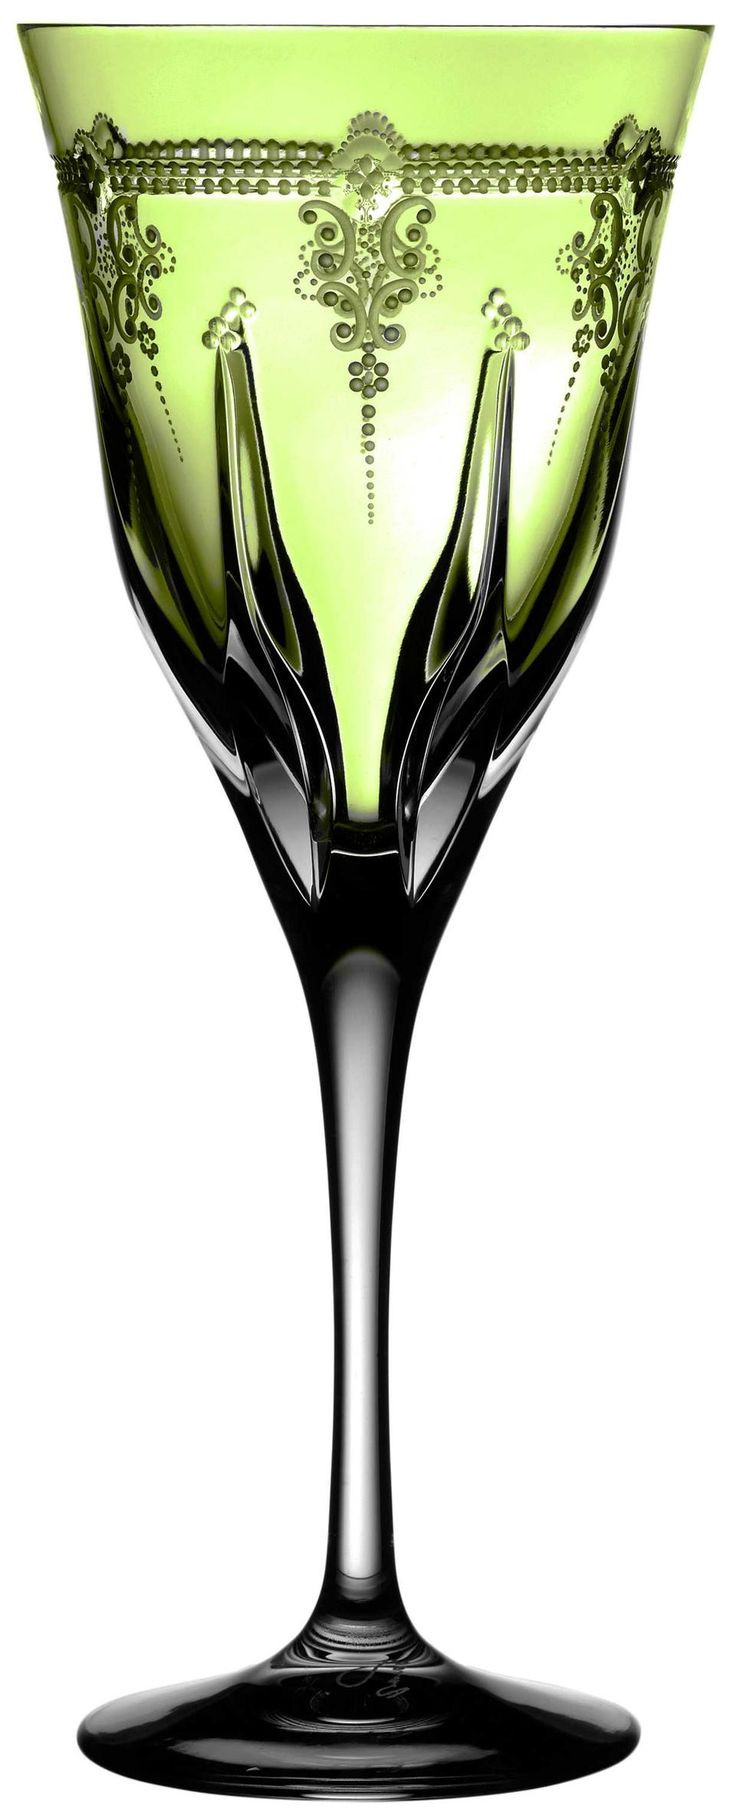 lenox fascination lead crystal vase of 346 best our beautiful colored glass images on pinterest glass art with regard to lisbon yellow green water glass varga in yardley pa